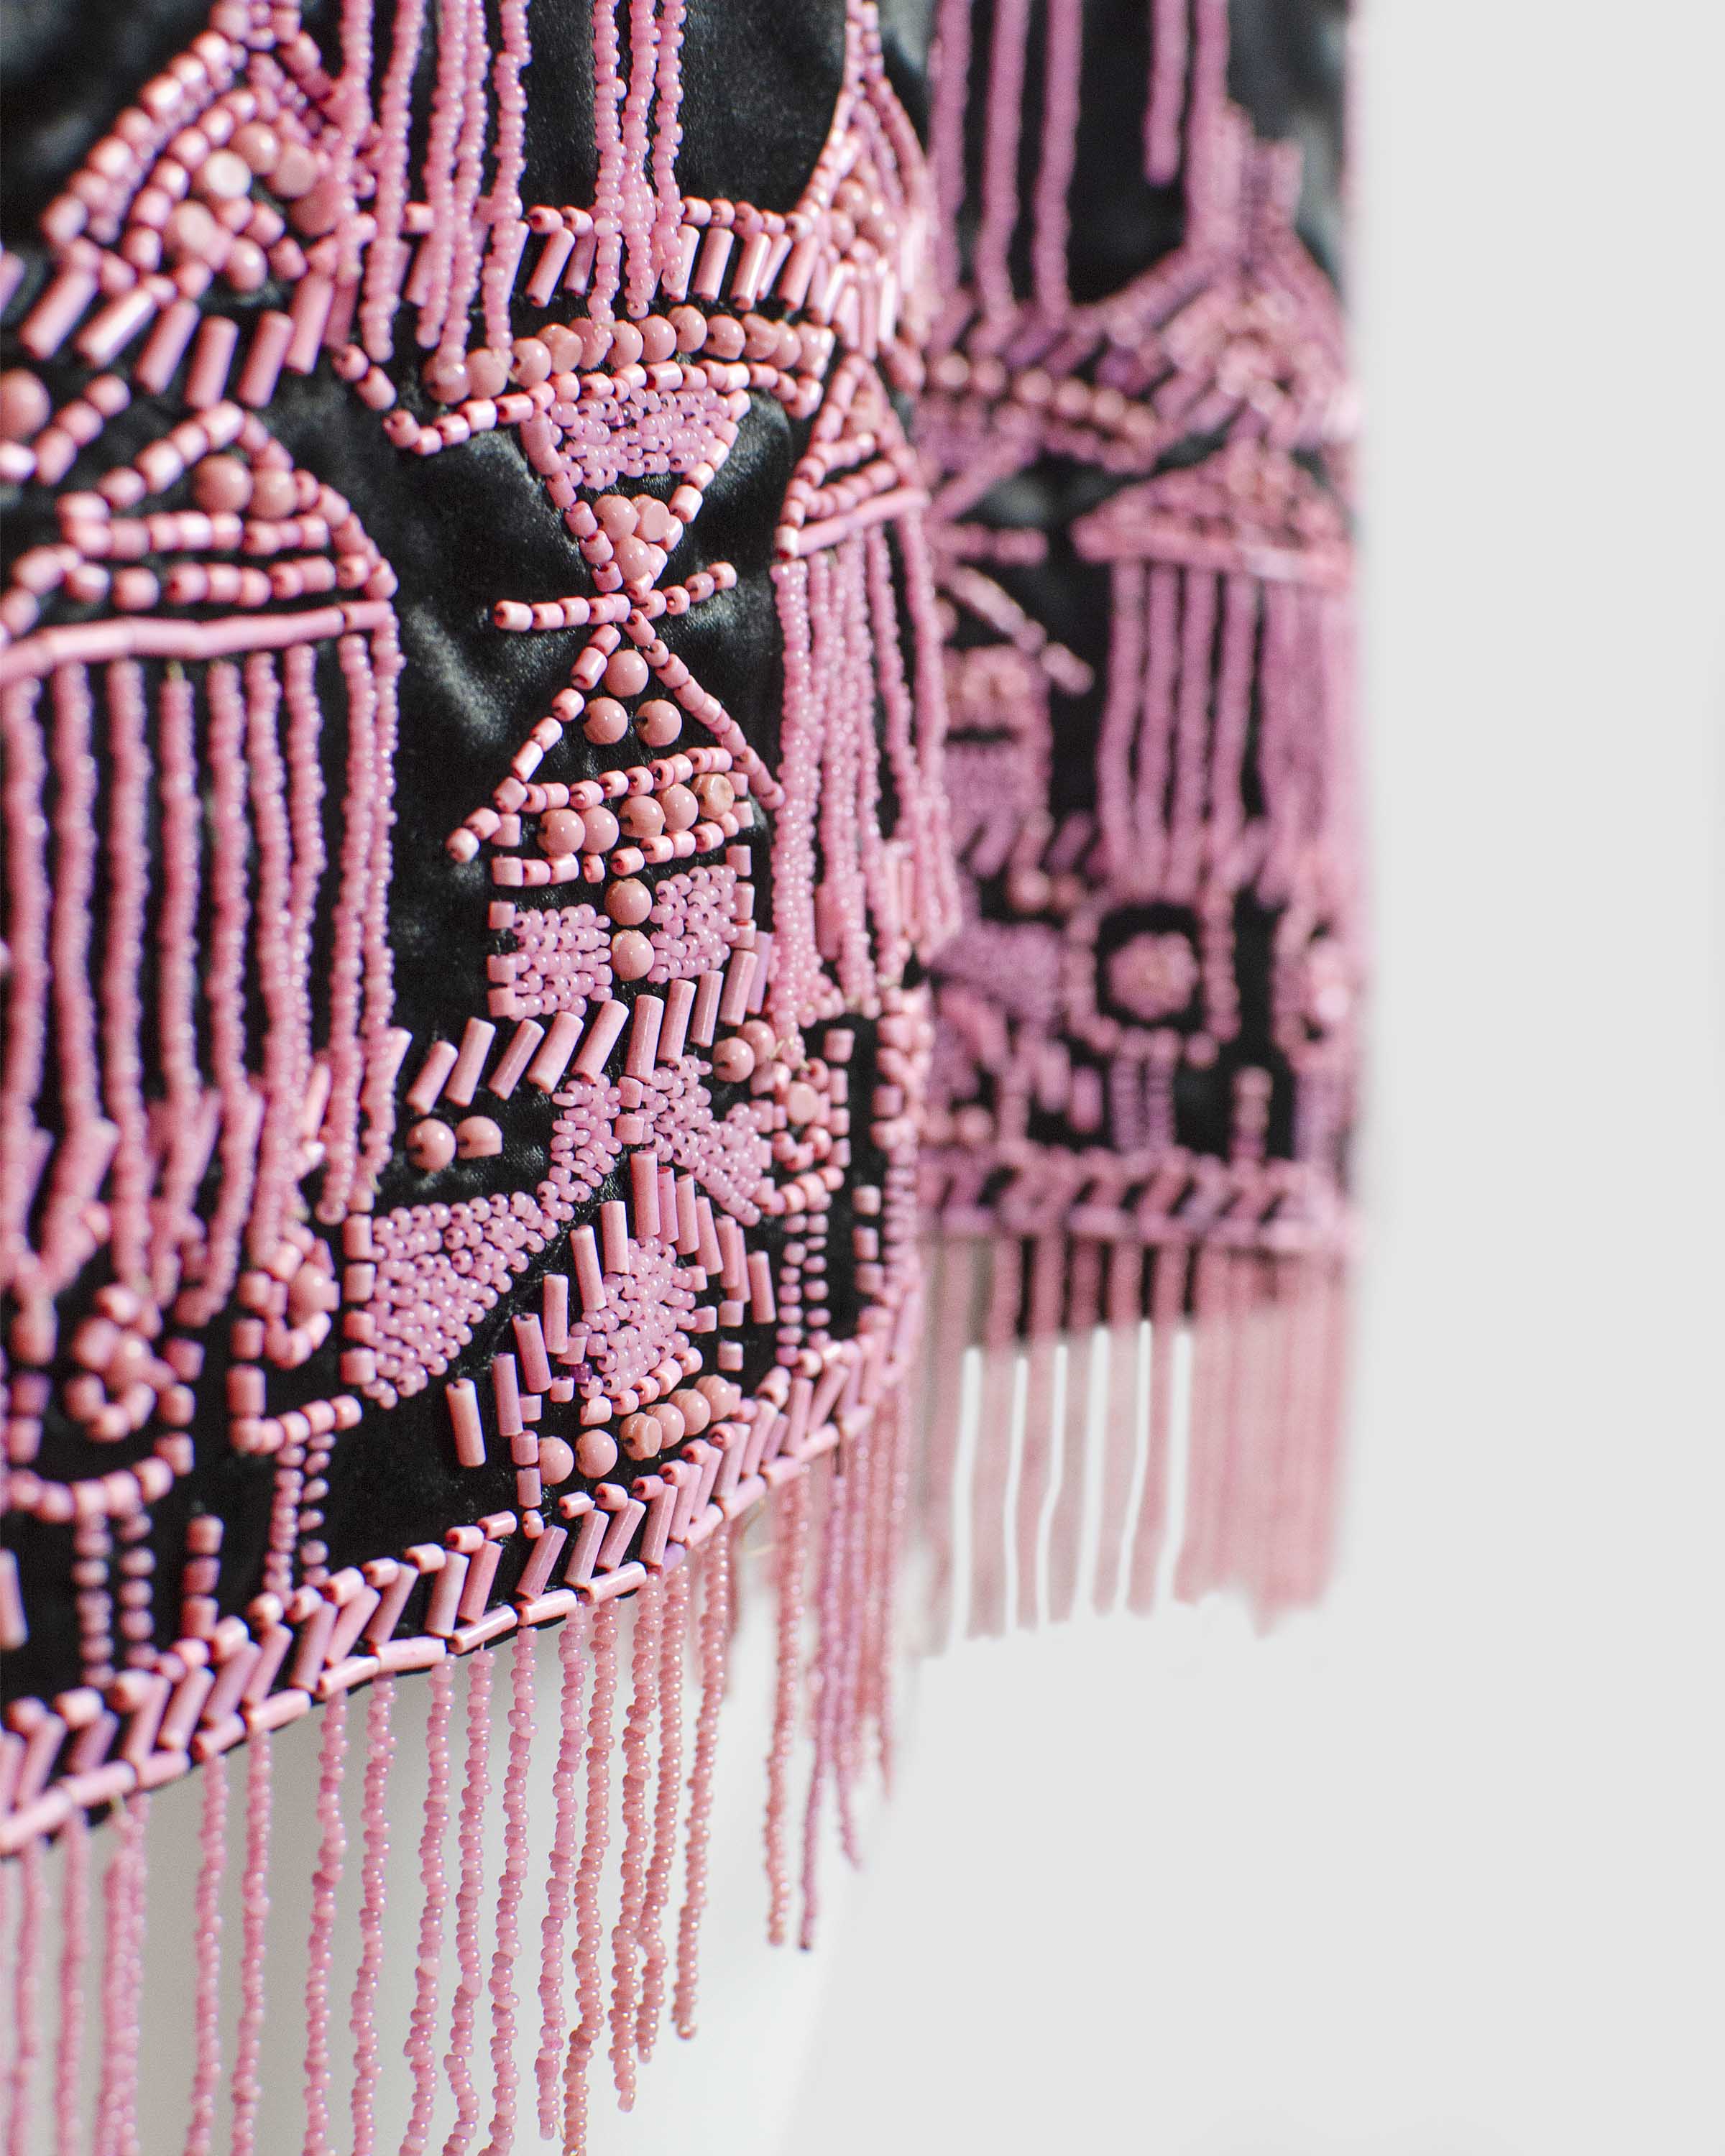 Detail photograph of the beading on the trim of a black satin sleeveless dress embroidered with narrow gold cord and pink beads